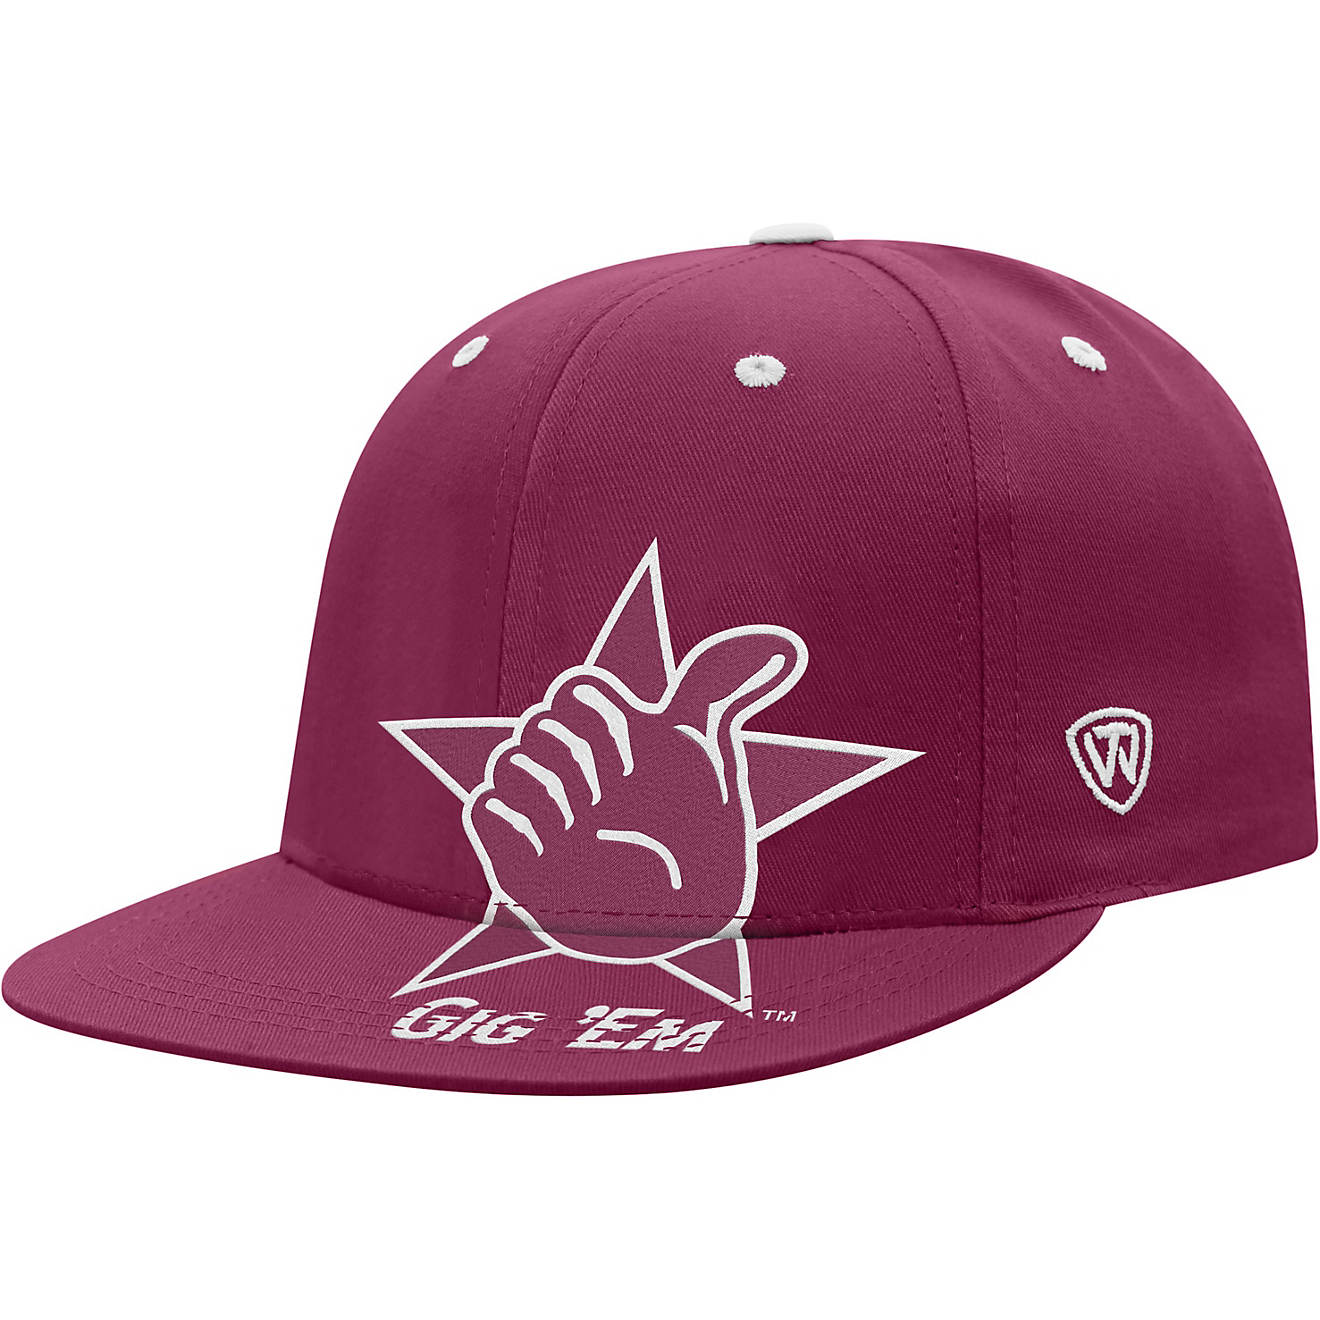 Top of the World Youth Texas A&M University Gantuan Adjustable Cap                                                               - view number 1